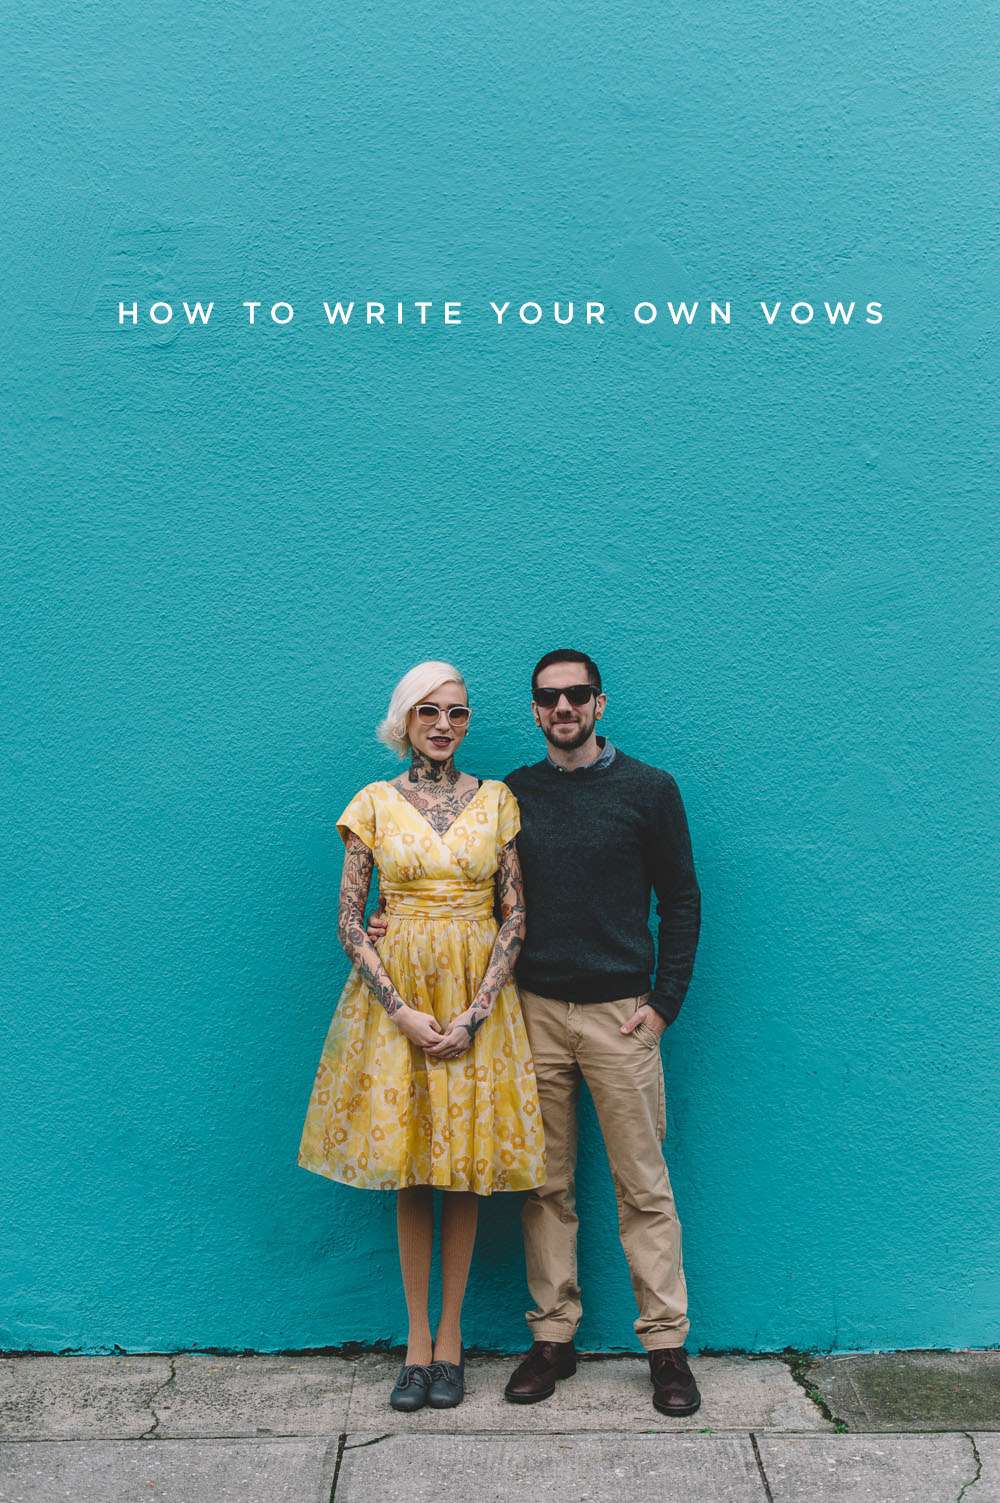 HOW TO WRITE YOUR OWN WEDDING VOWS